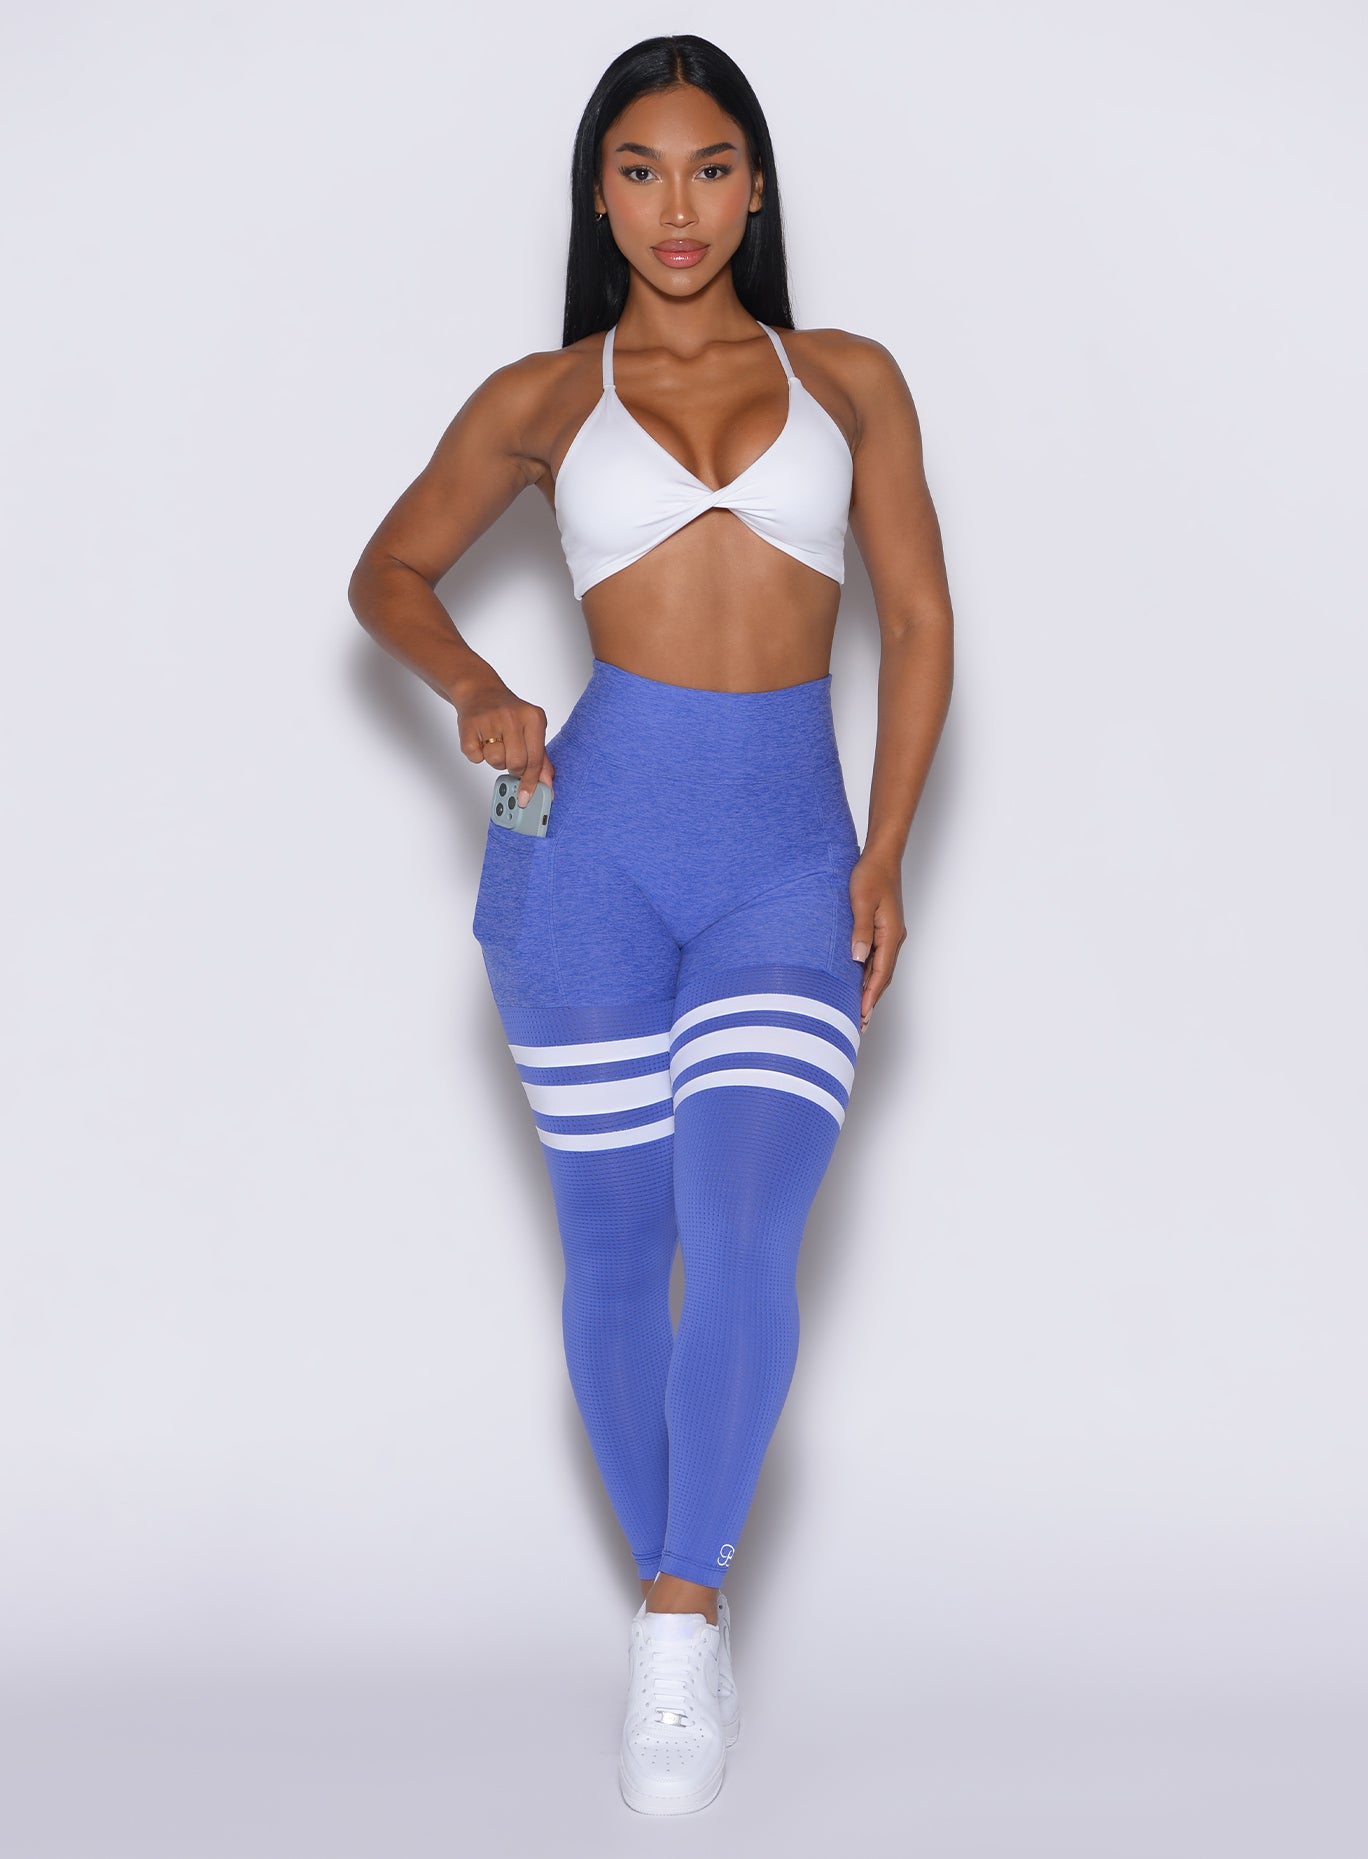 front profile view of a model wearing our scrunch thigh-highs in violet blue with three white stripes on the thighs, complemented by a matching white sports bra.